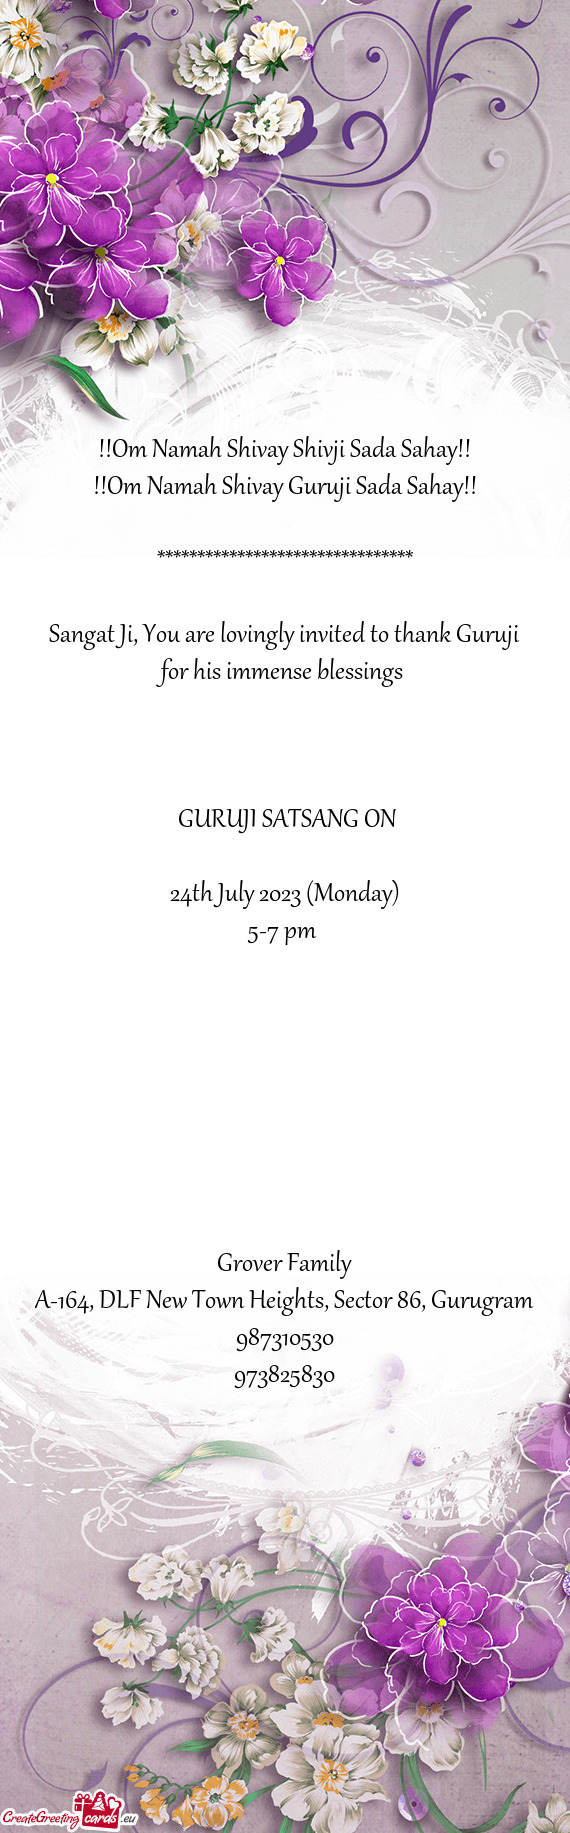 Sangat Ji, You are lovingly invited to thank Guruji for his immense blessings